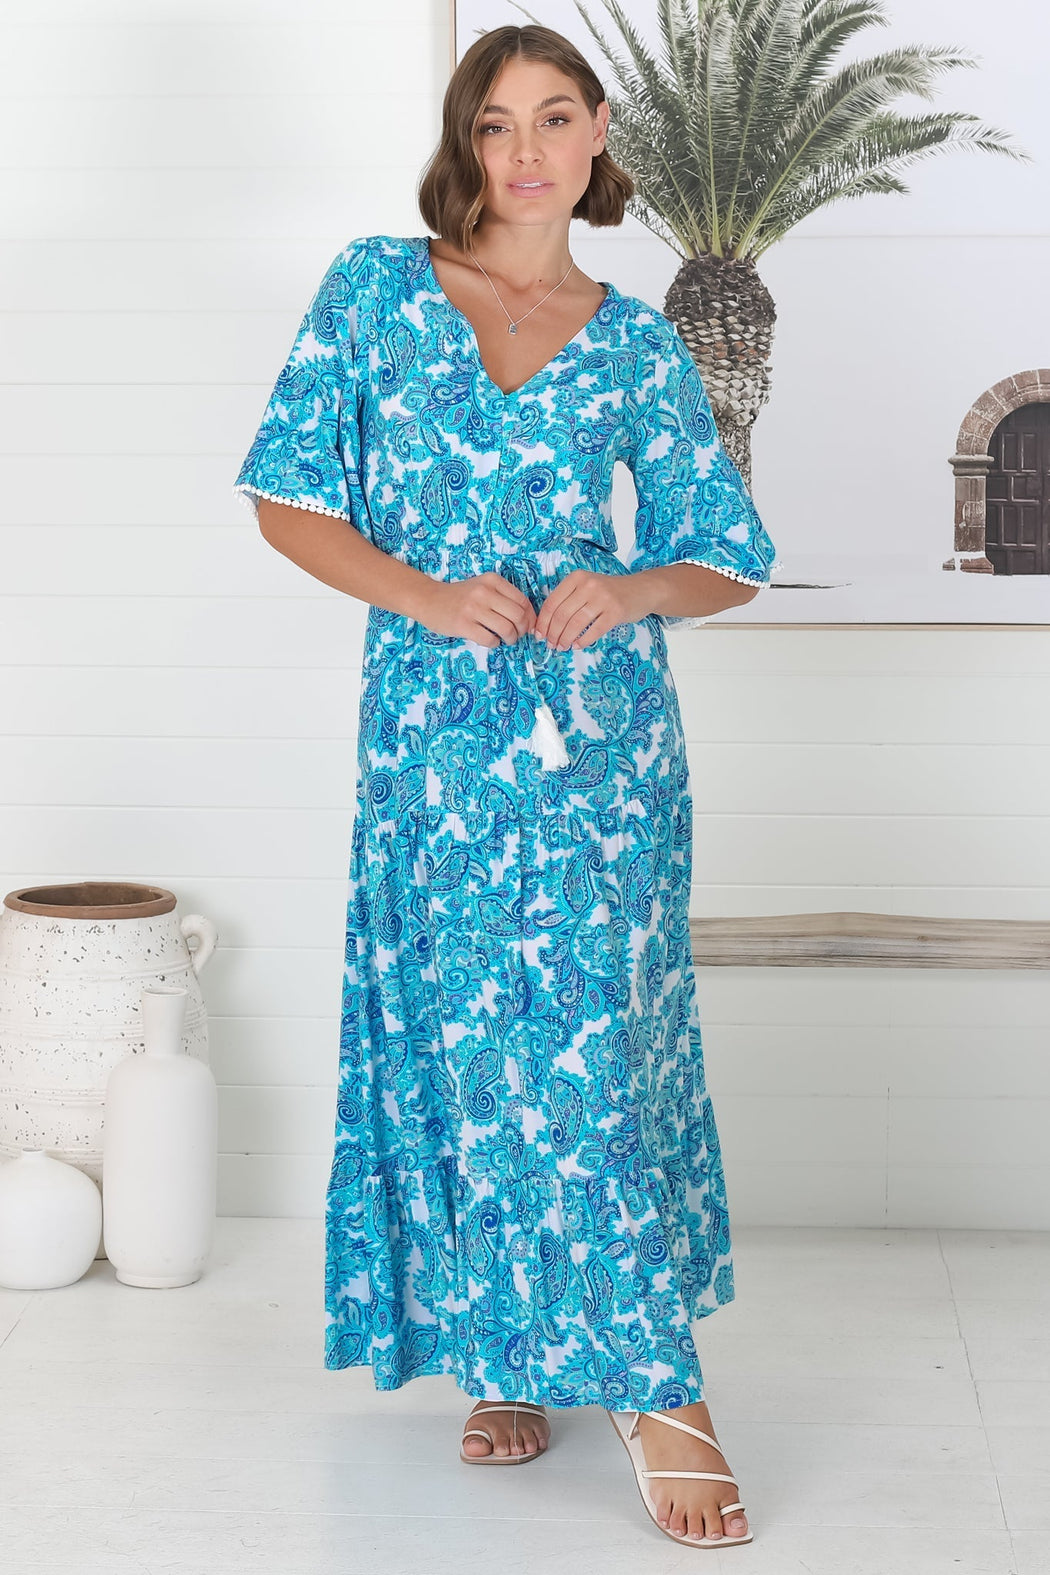 Shop the Romelly Maxi Dress in Blue at Salty Crush | Boho-Chic Dresses